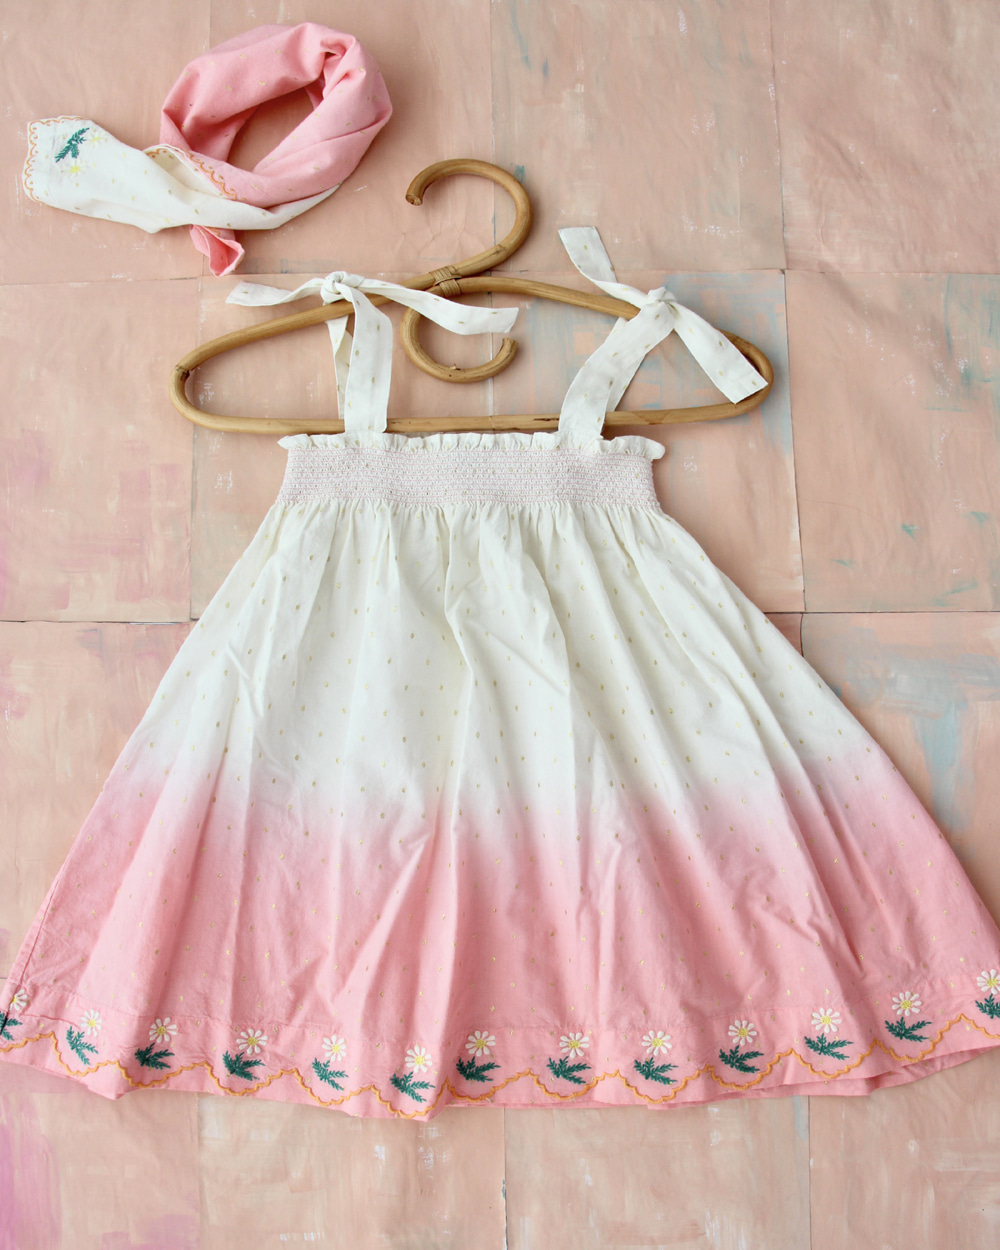 [BONJOUR] Dip dye skirt dress with embroidery /Cotton voile full lining